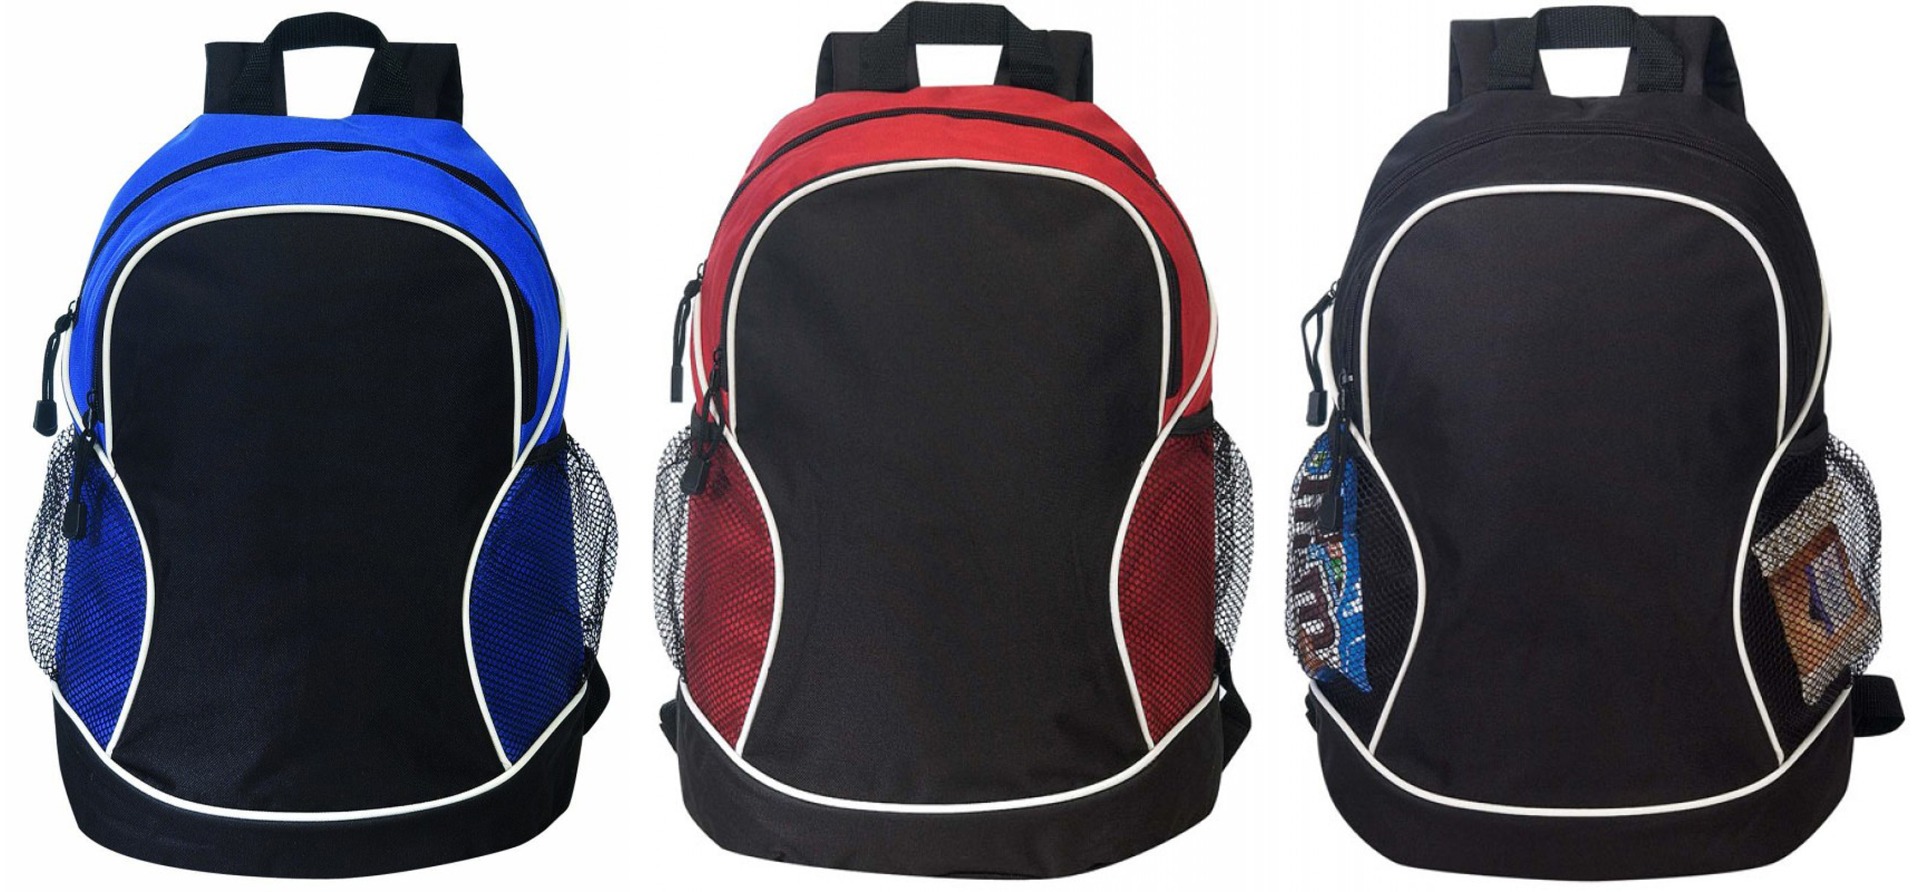 ''17'''' BACKPACKs - Choose Your Color(s)''